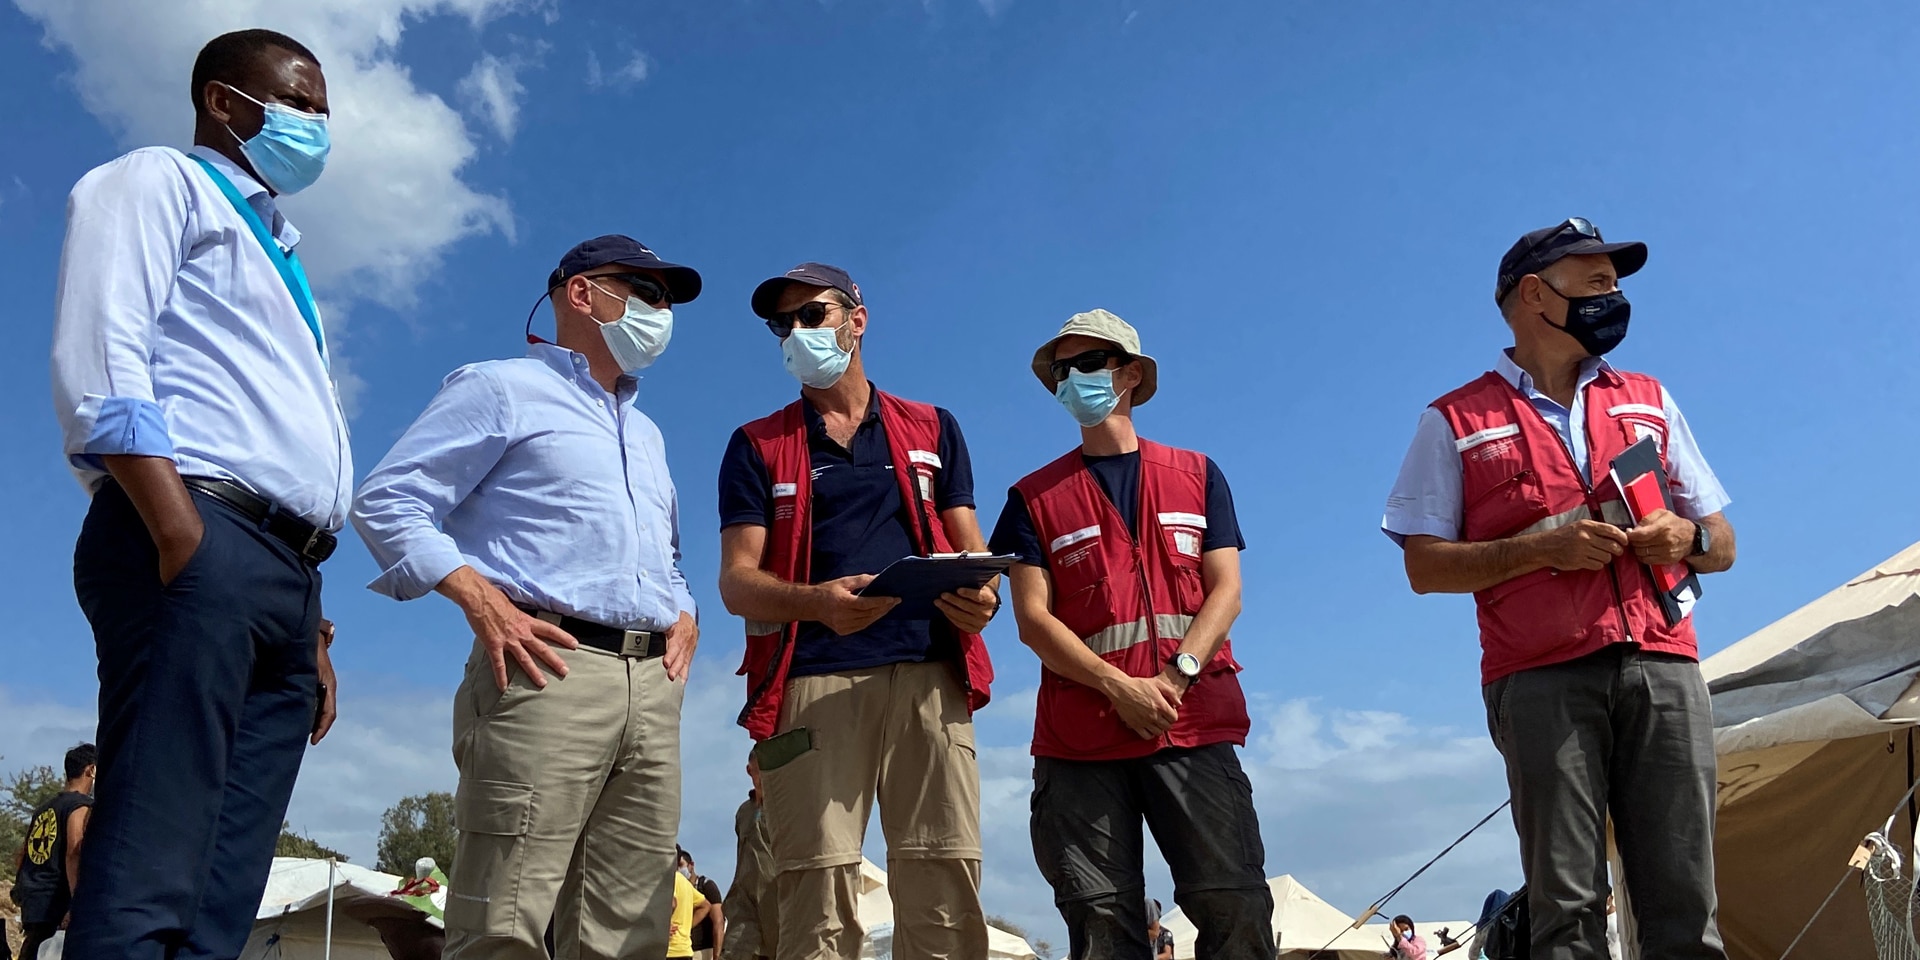 The Head of Switzerland's Humanitarian Aid Department Manuel Bessler talks to members of the Swiss Humanitarian Aid Unit and Spiros Habimama, deputy director of the Lesbos camp, during a site visit.